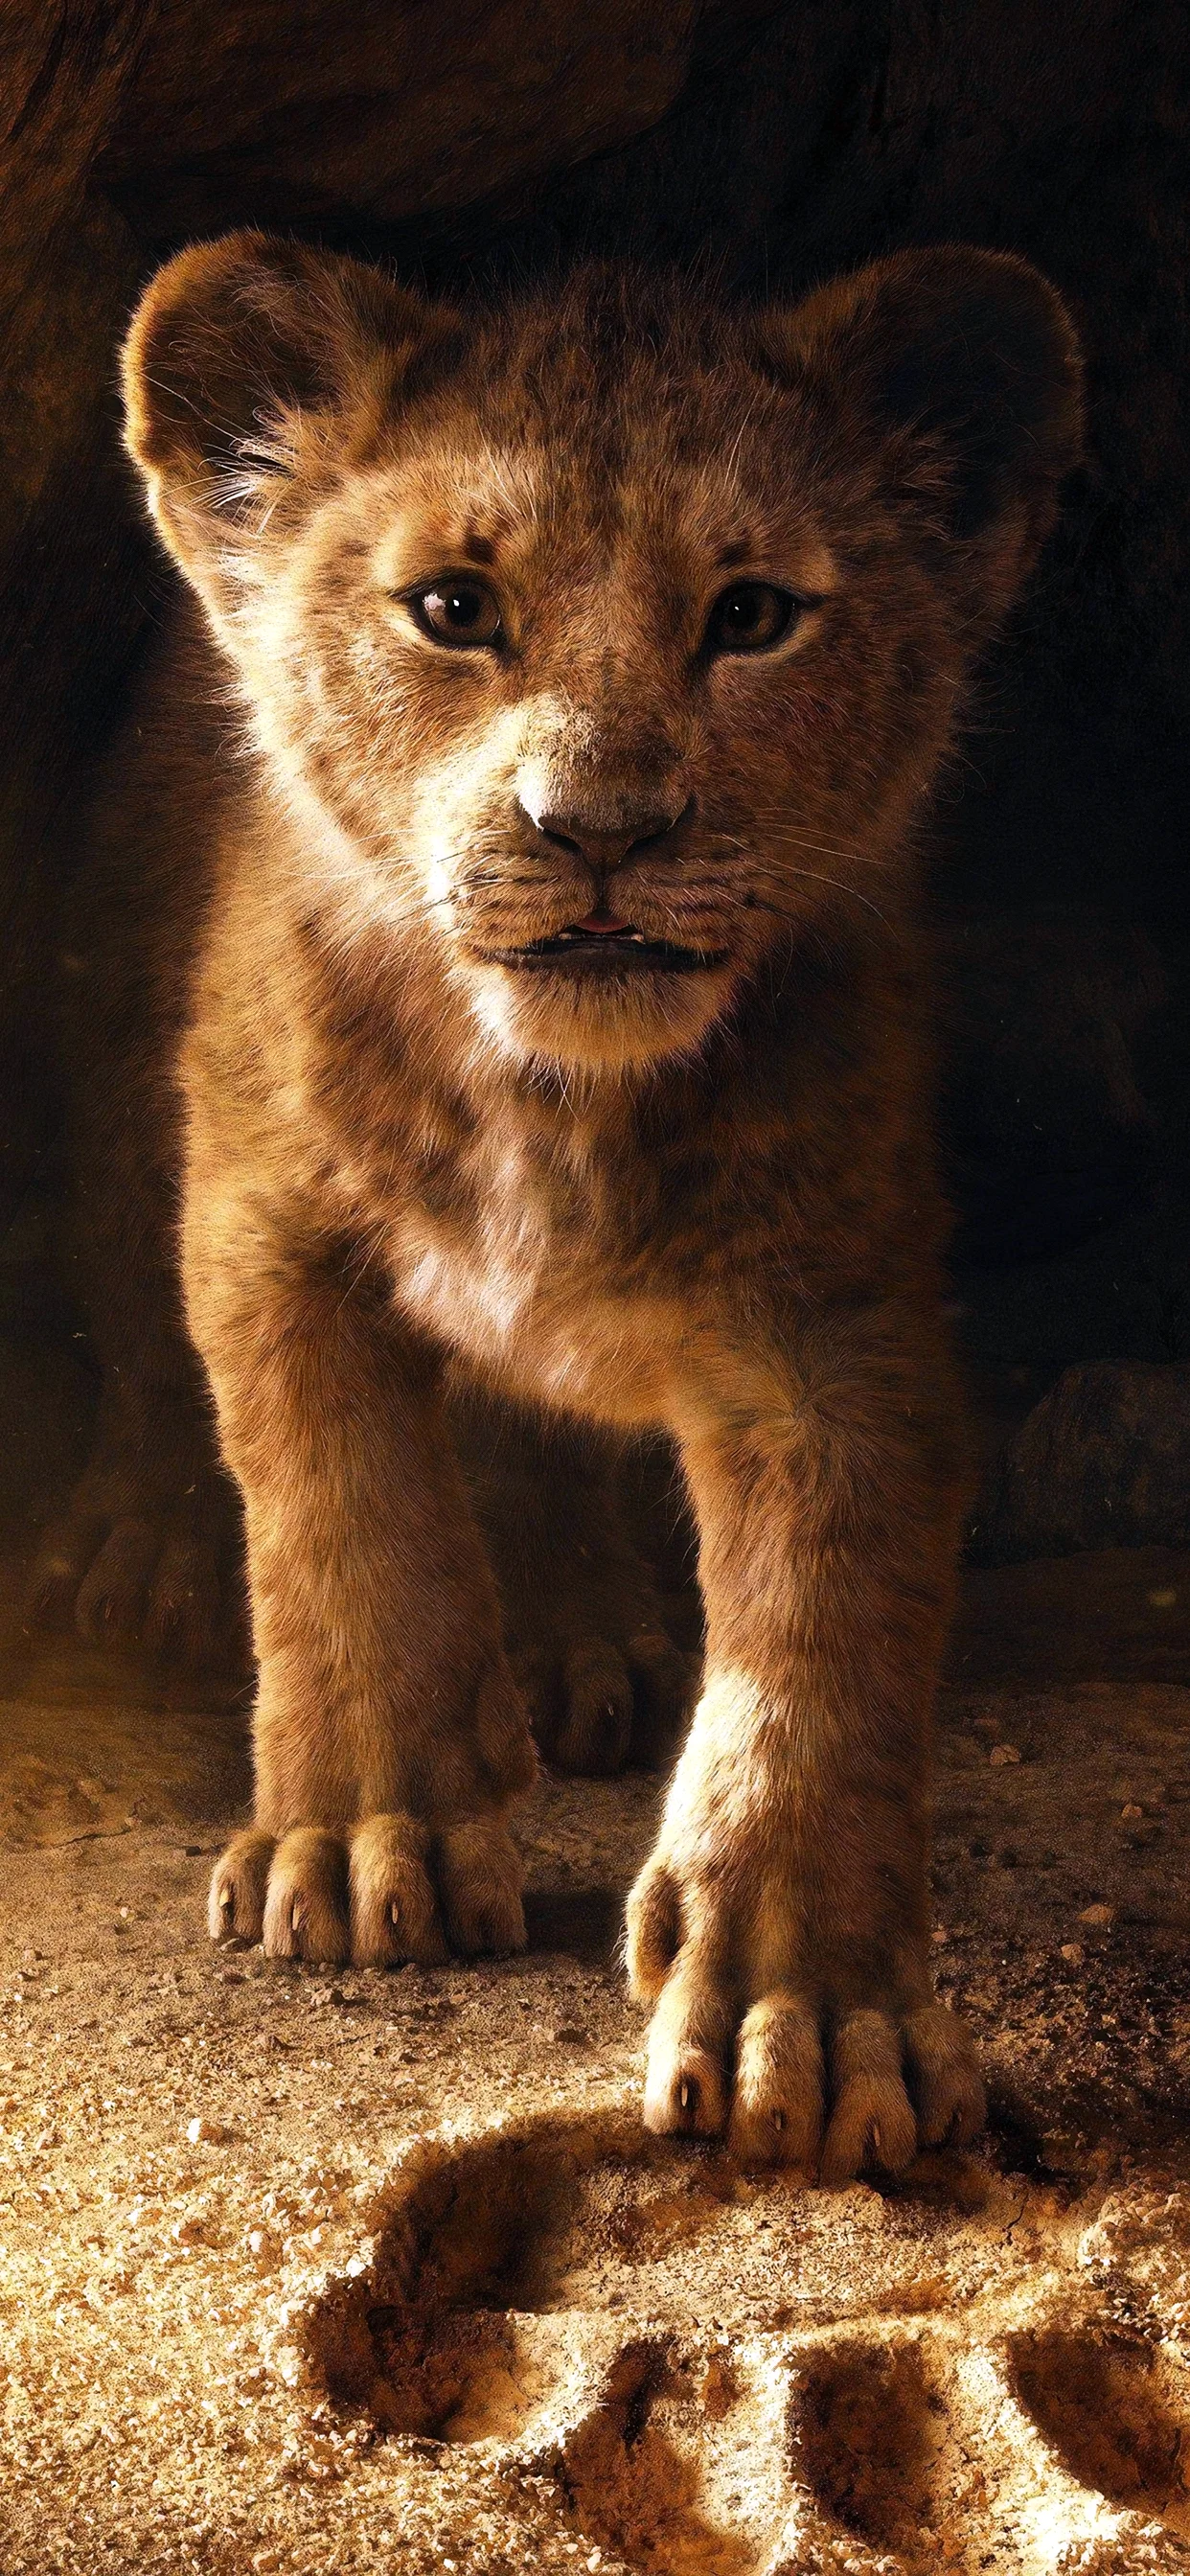 The Lion King 2019 Wallpaper for iPhone 11 Pro Max